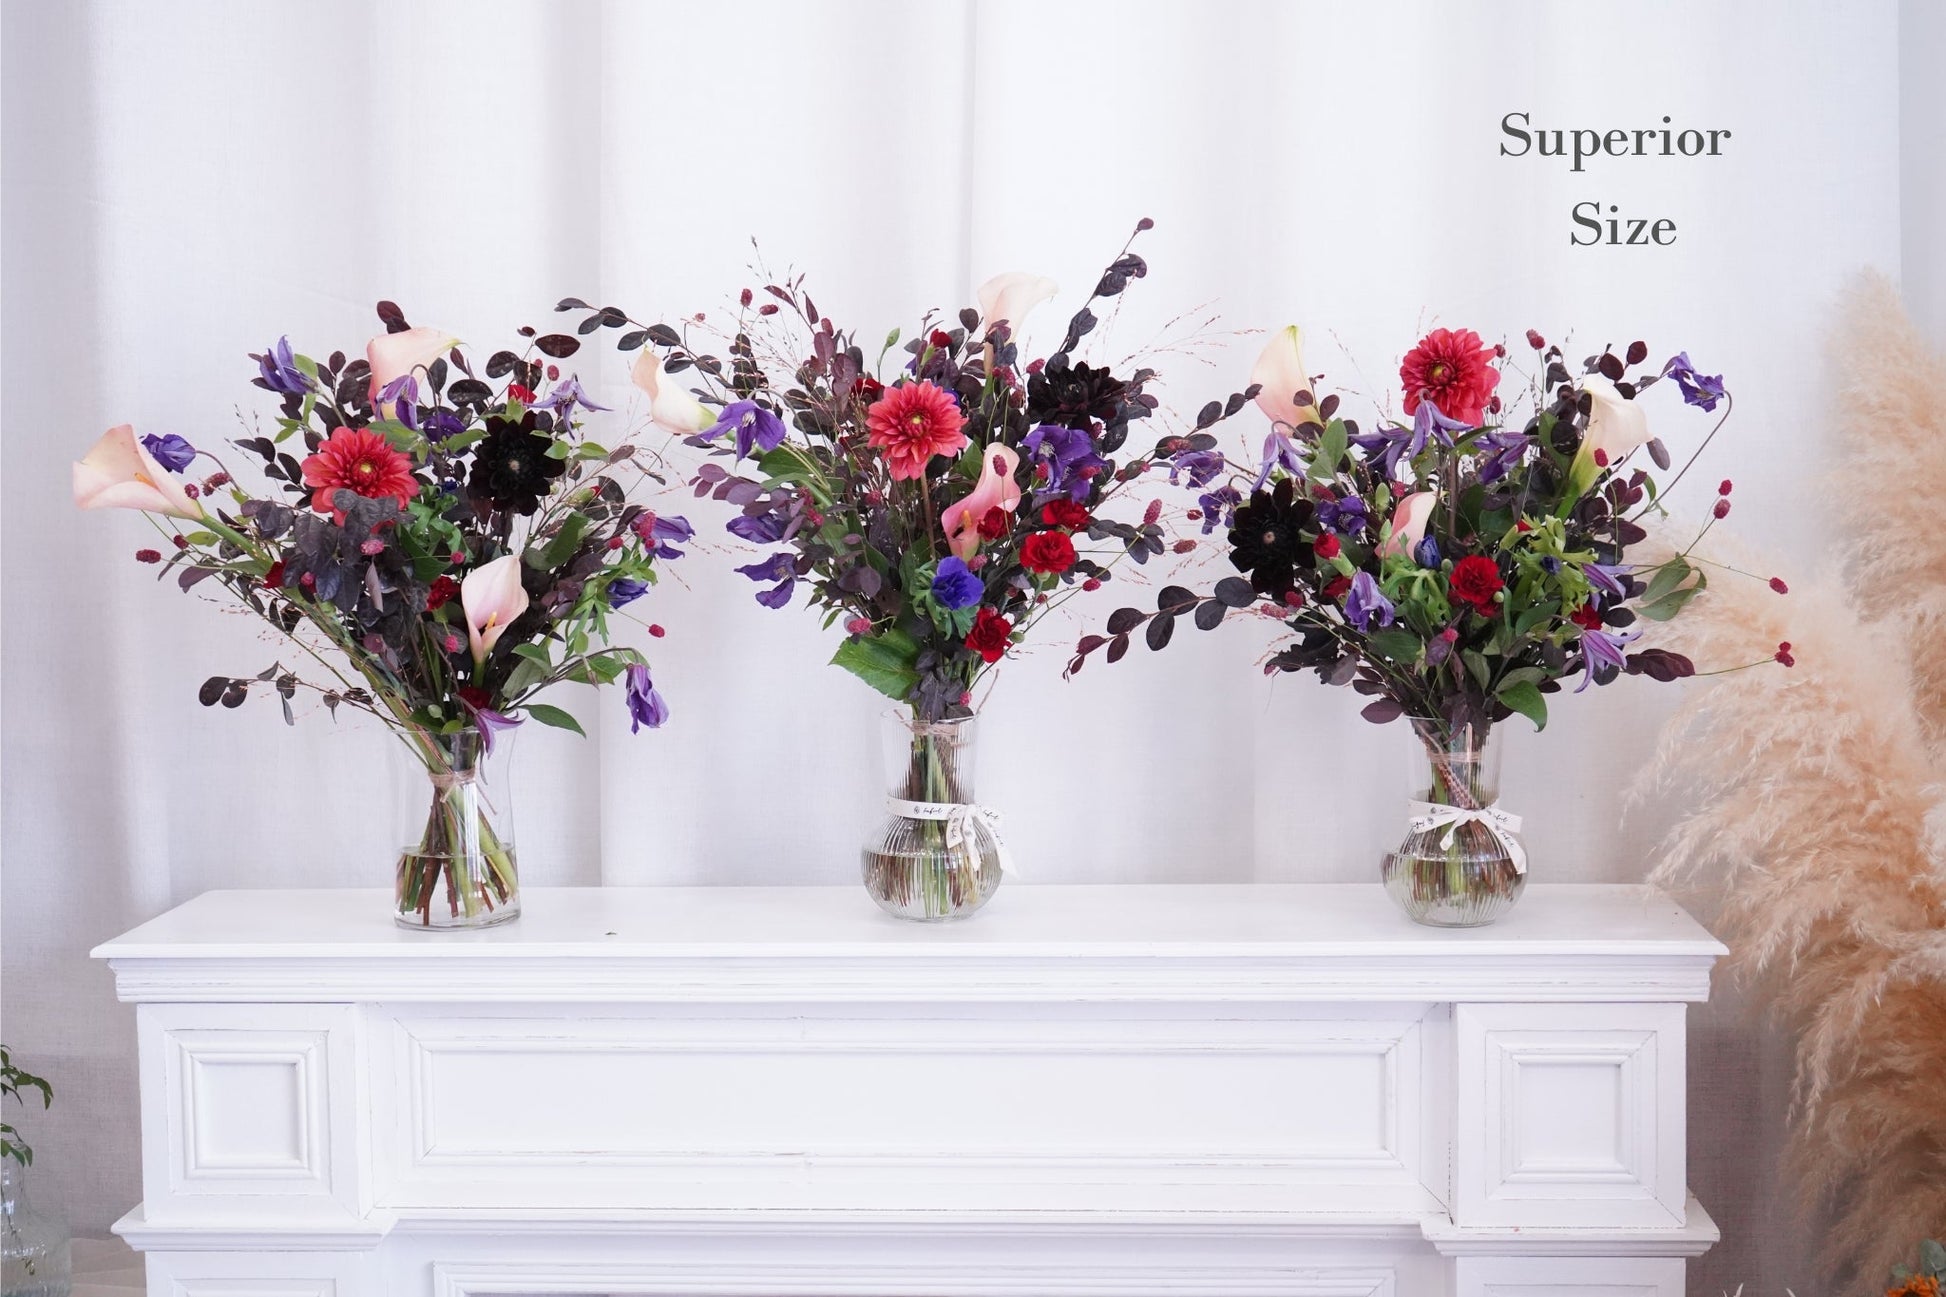 Weekly Flower Subscription - Standard - - Subscription - - 2